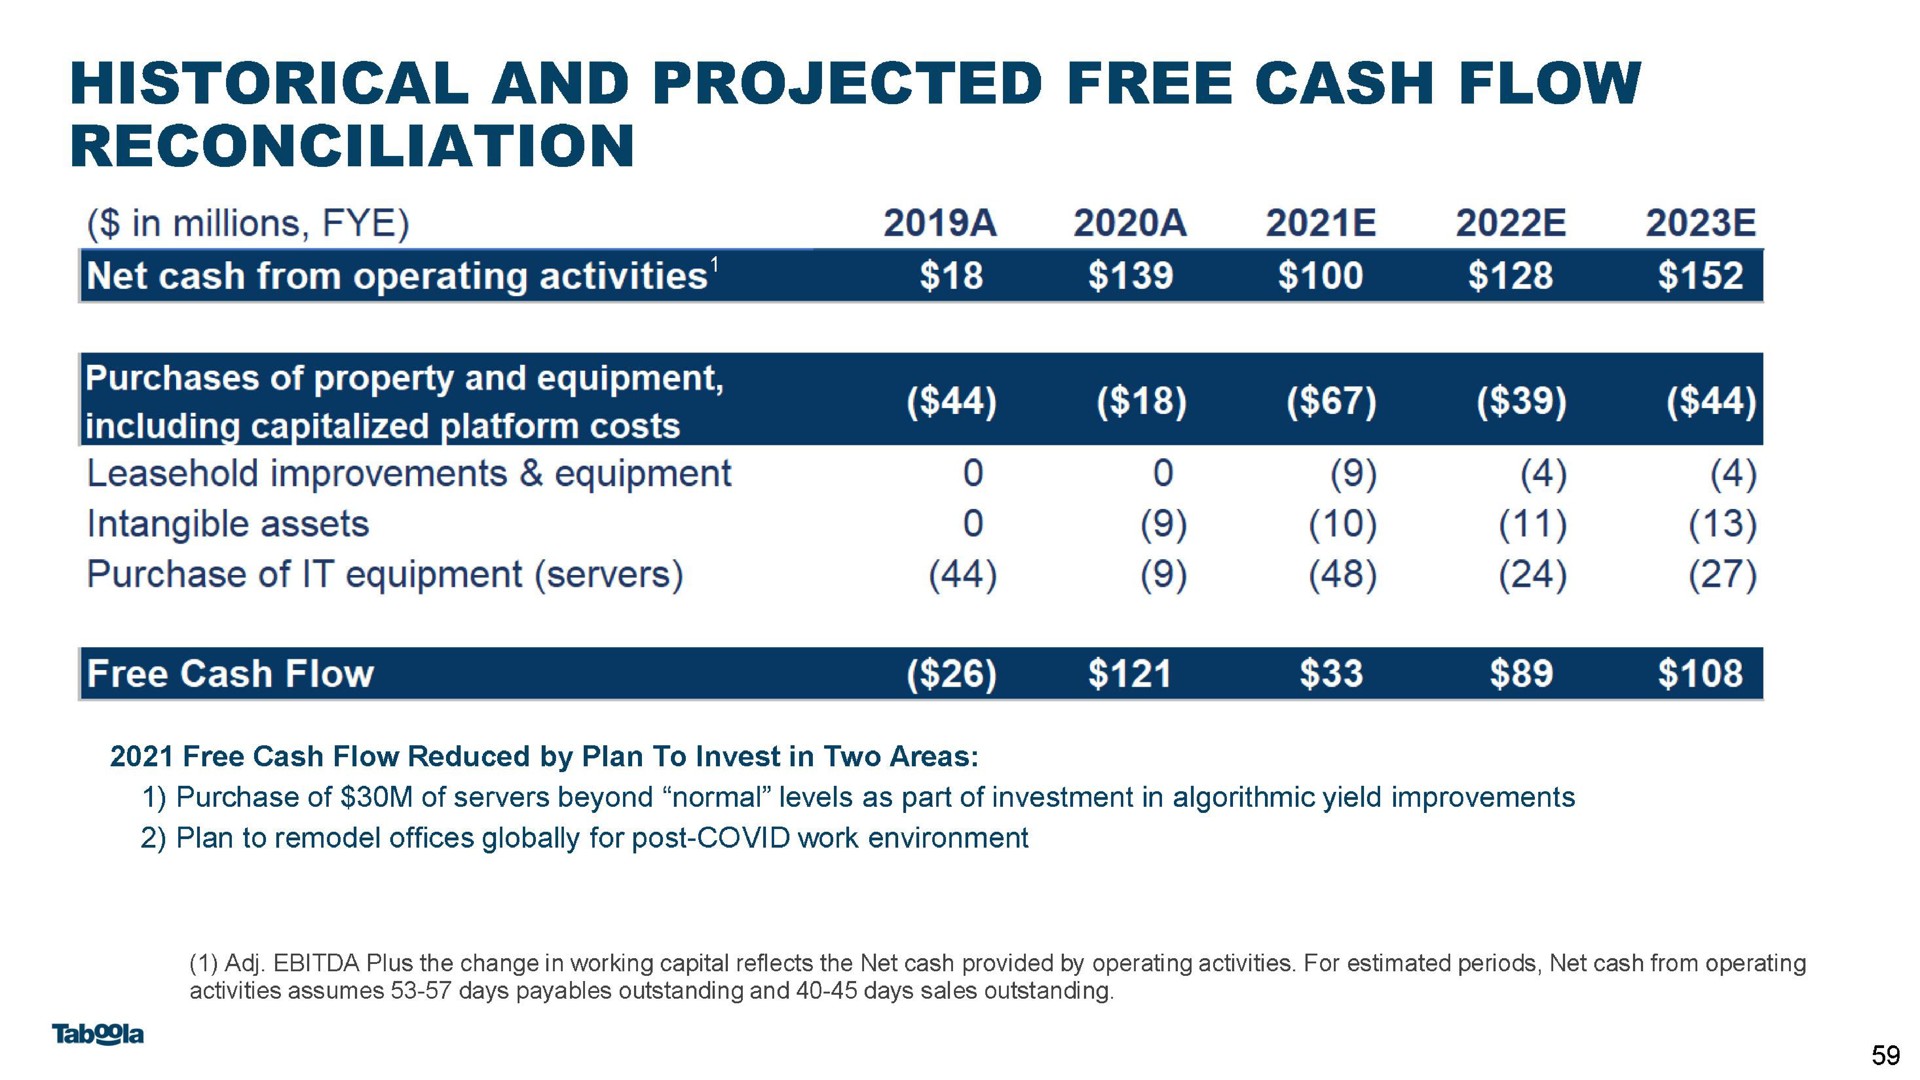 historical and projected free cash flow reconciliation | Taboola